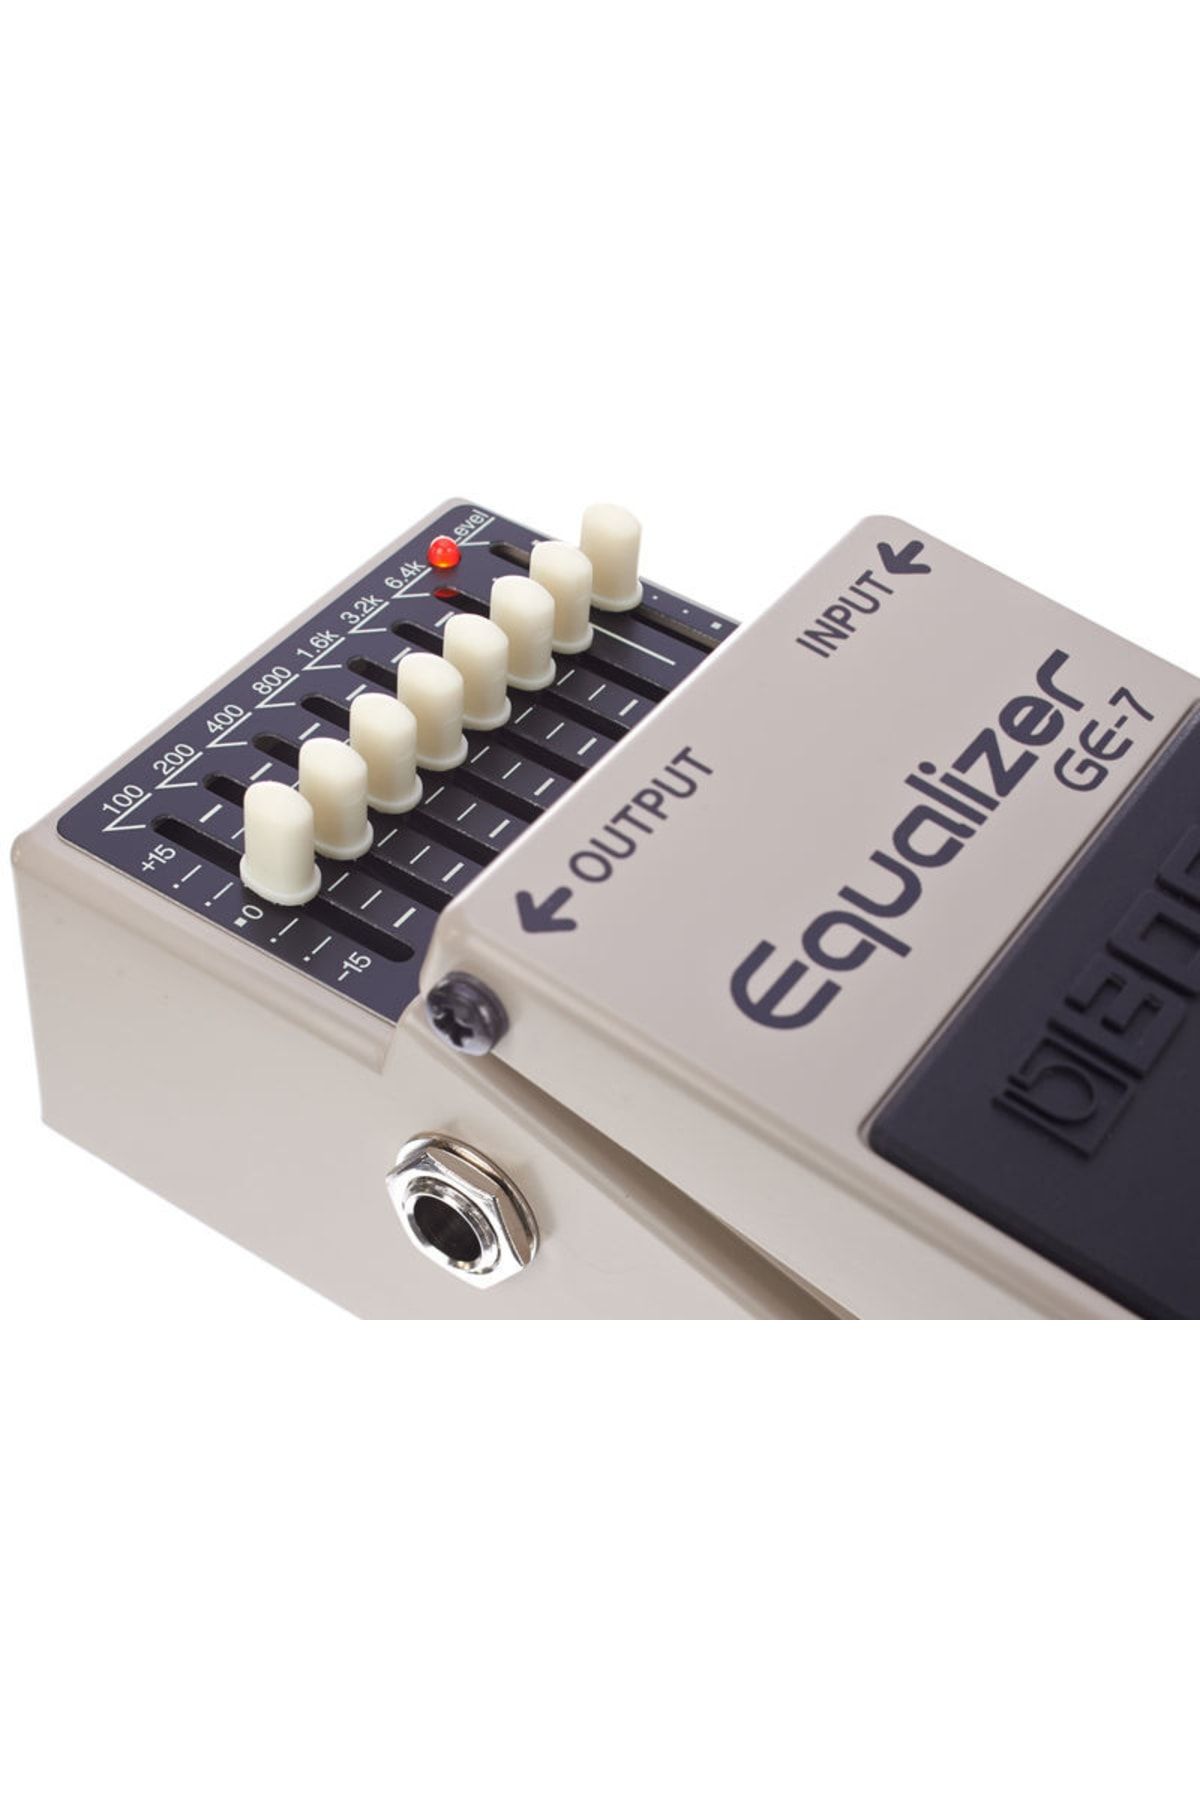 BOSS Ge-7 Equalizer Compact Pedal